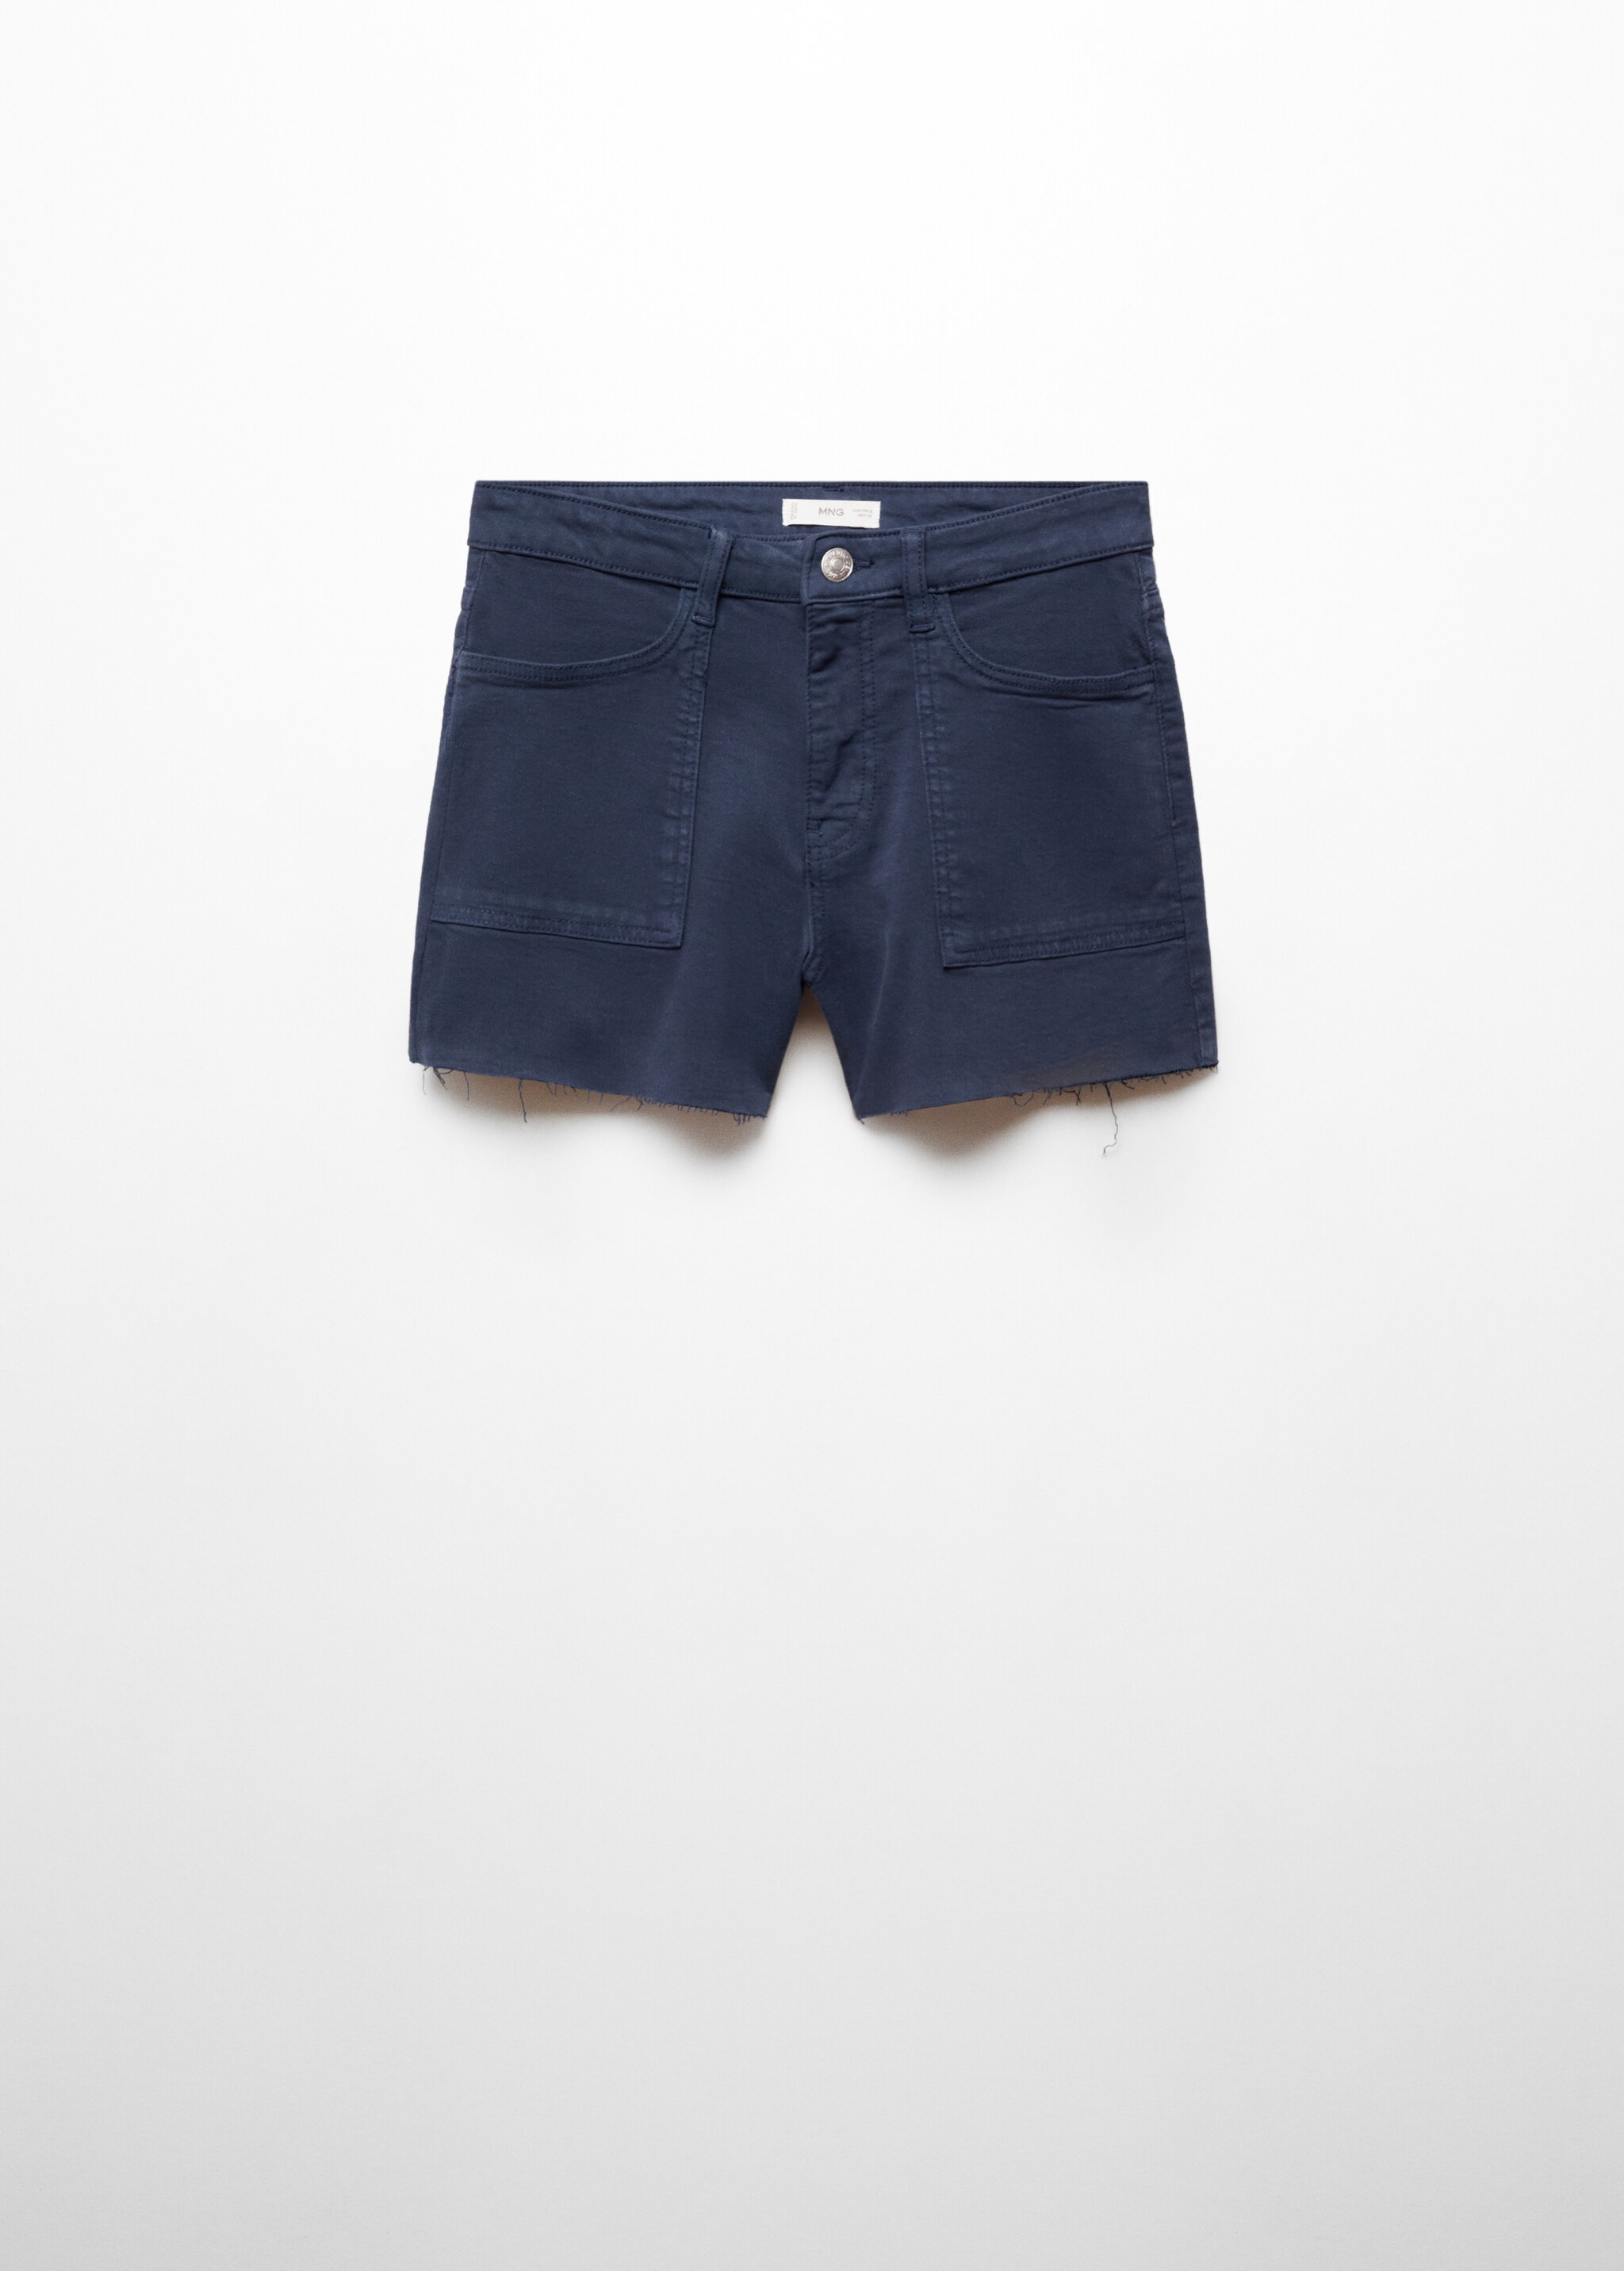 Cotton shorts with pockets - Article without model